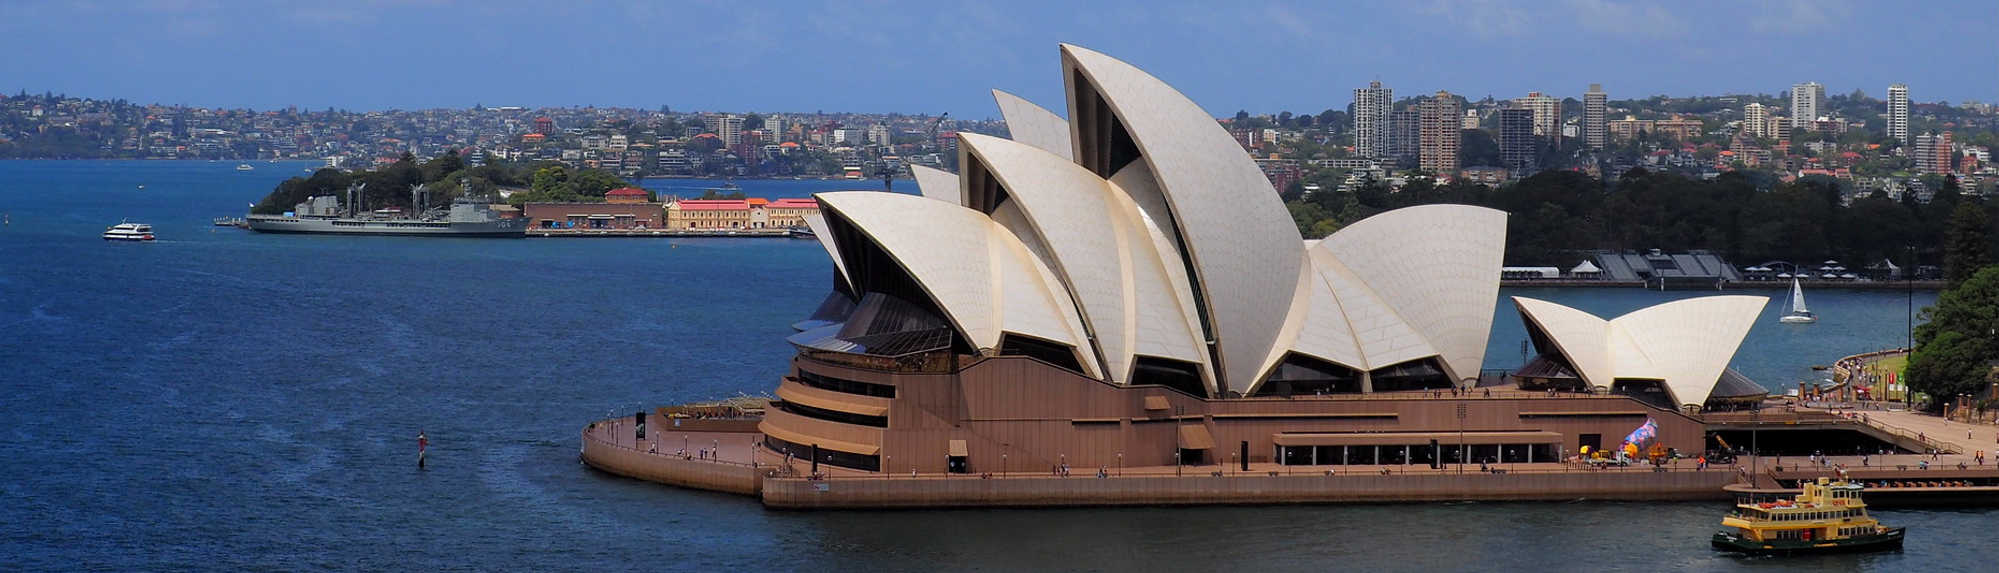 New South Wales Attractions